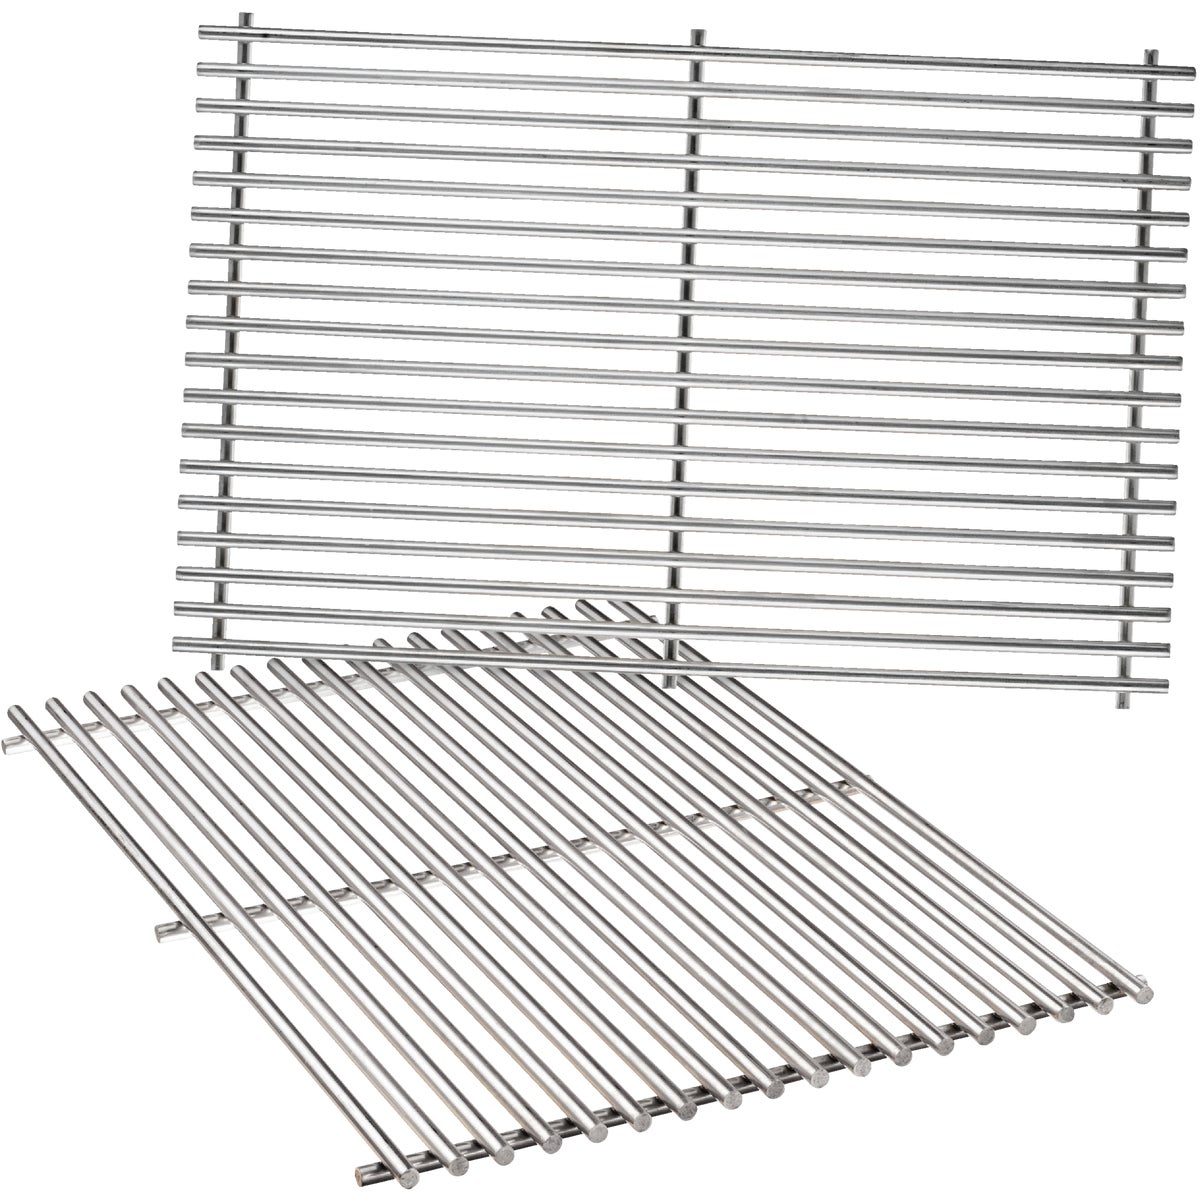 Item 800834, Webers Grill Grate is constructed of stainless steel material to ensure 